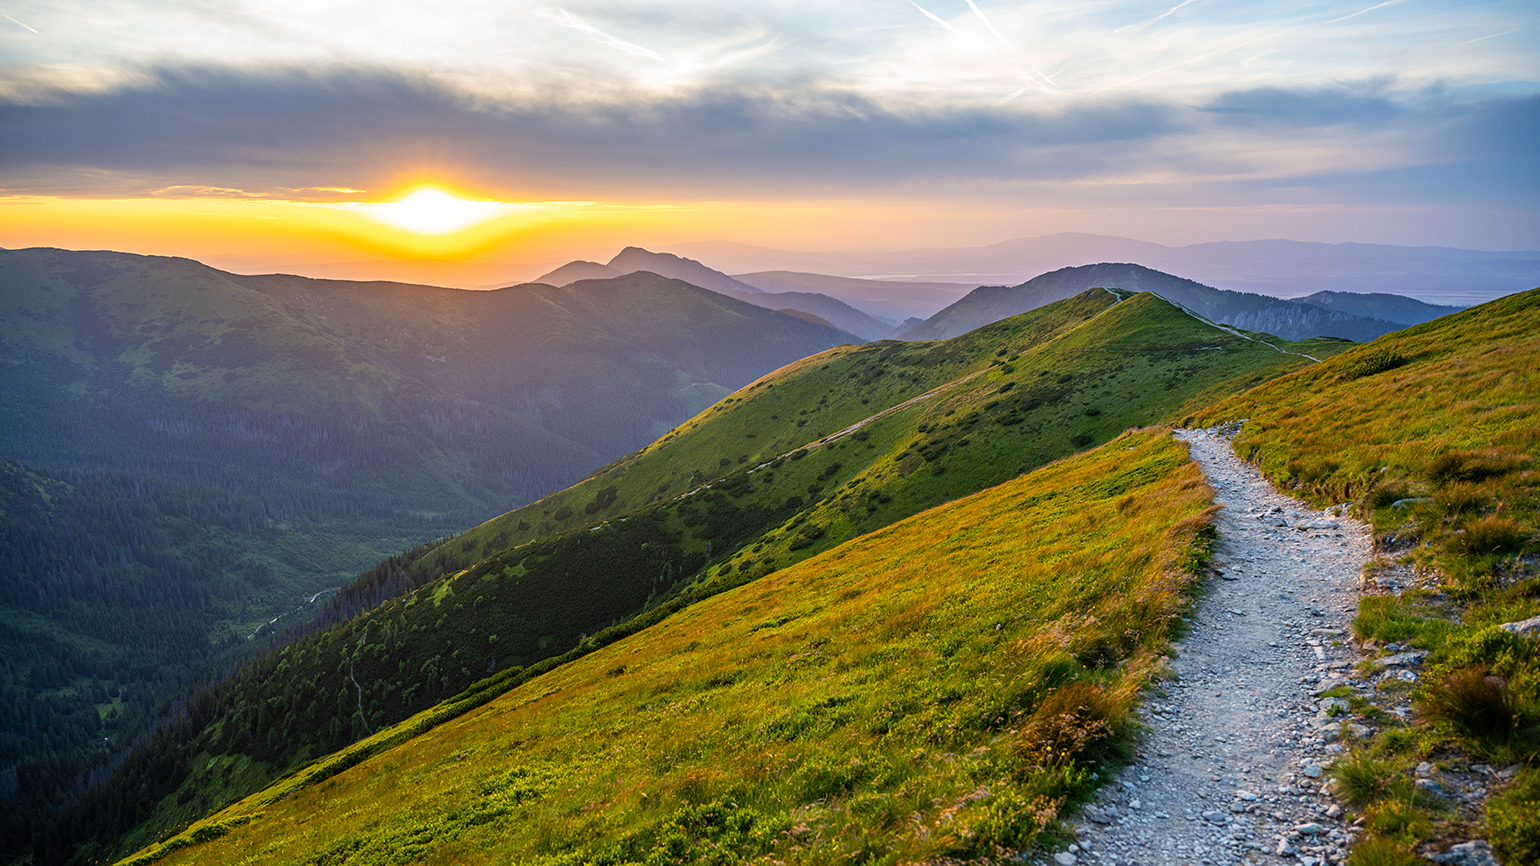 Royalty-Free Stock Photo: A path in the mountains resembling the path to true belief.